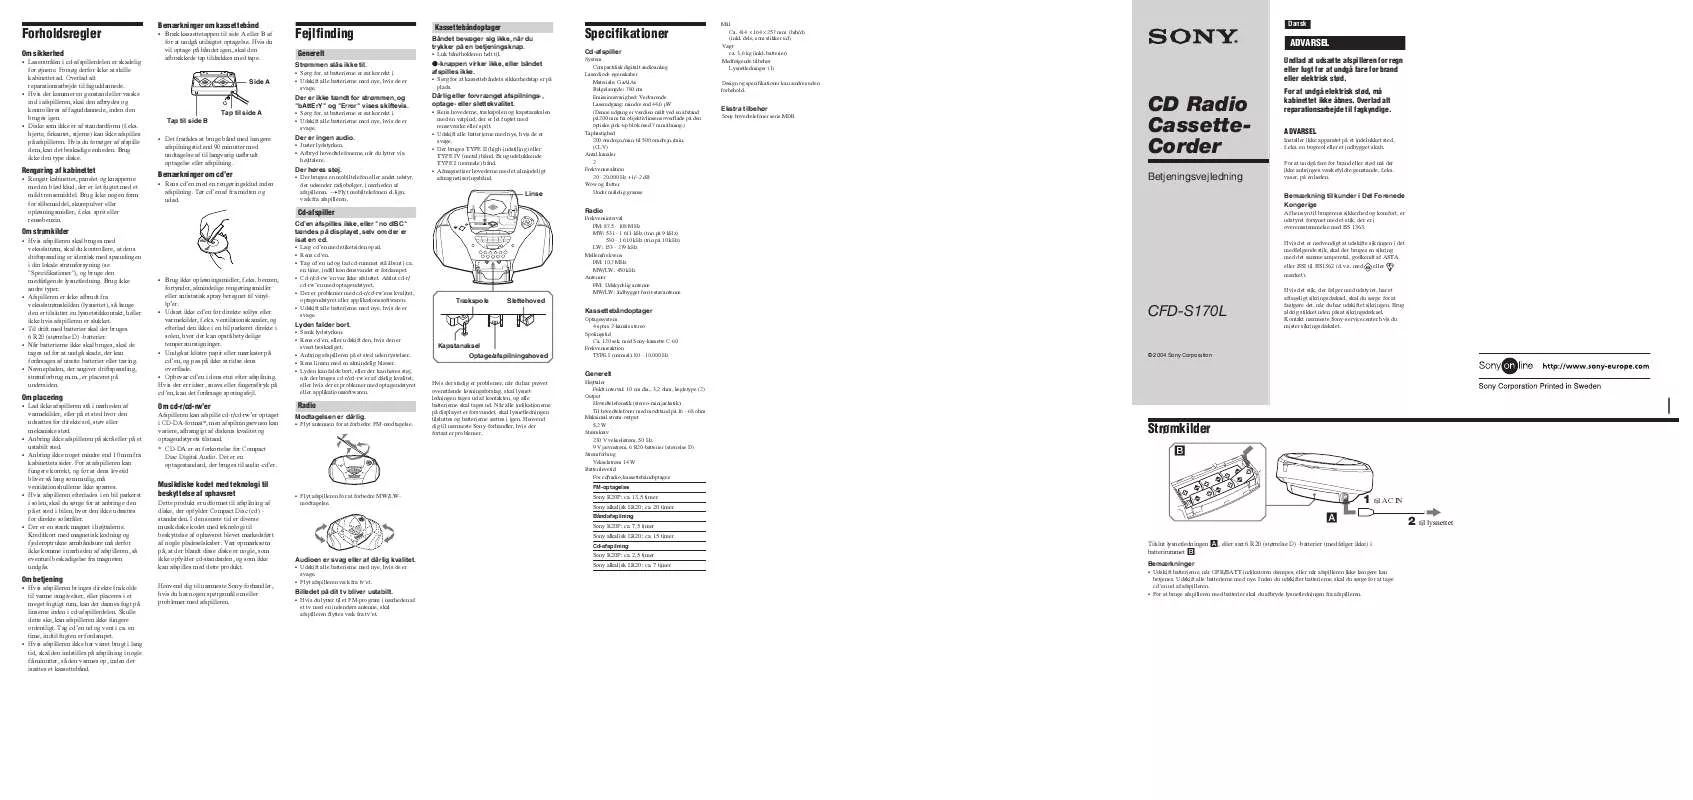 Mode d'emploi SONY CFD-S170